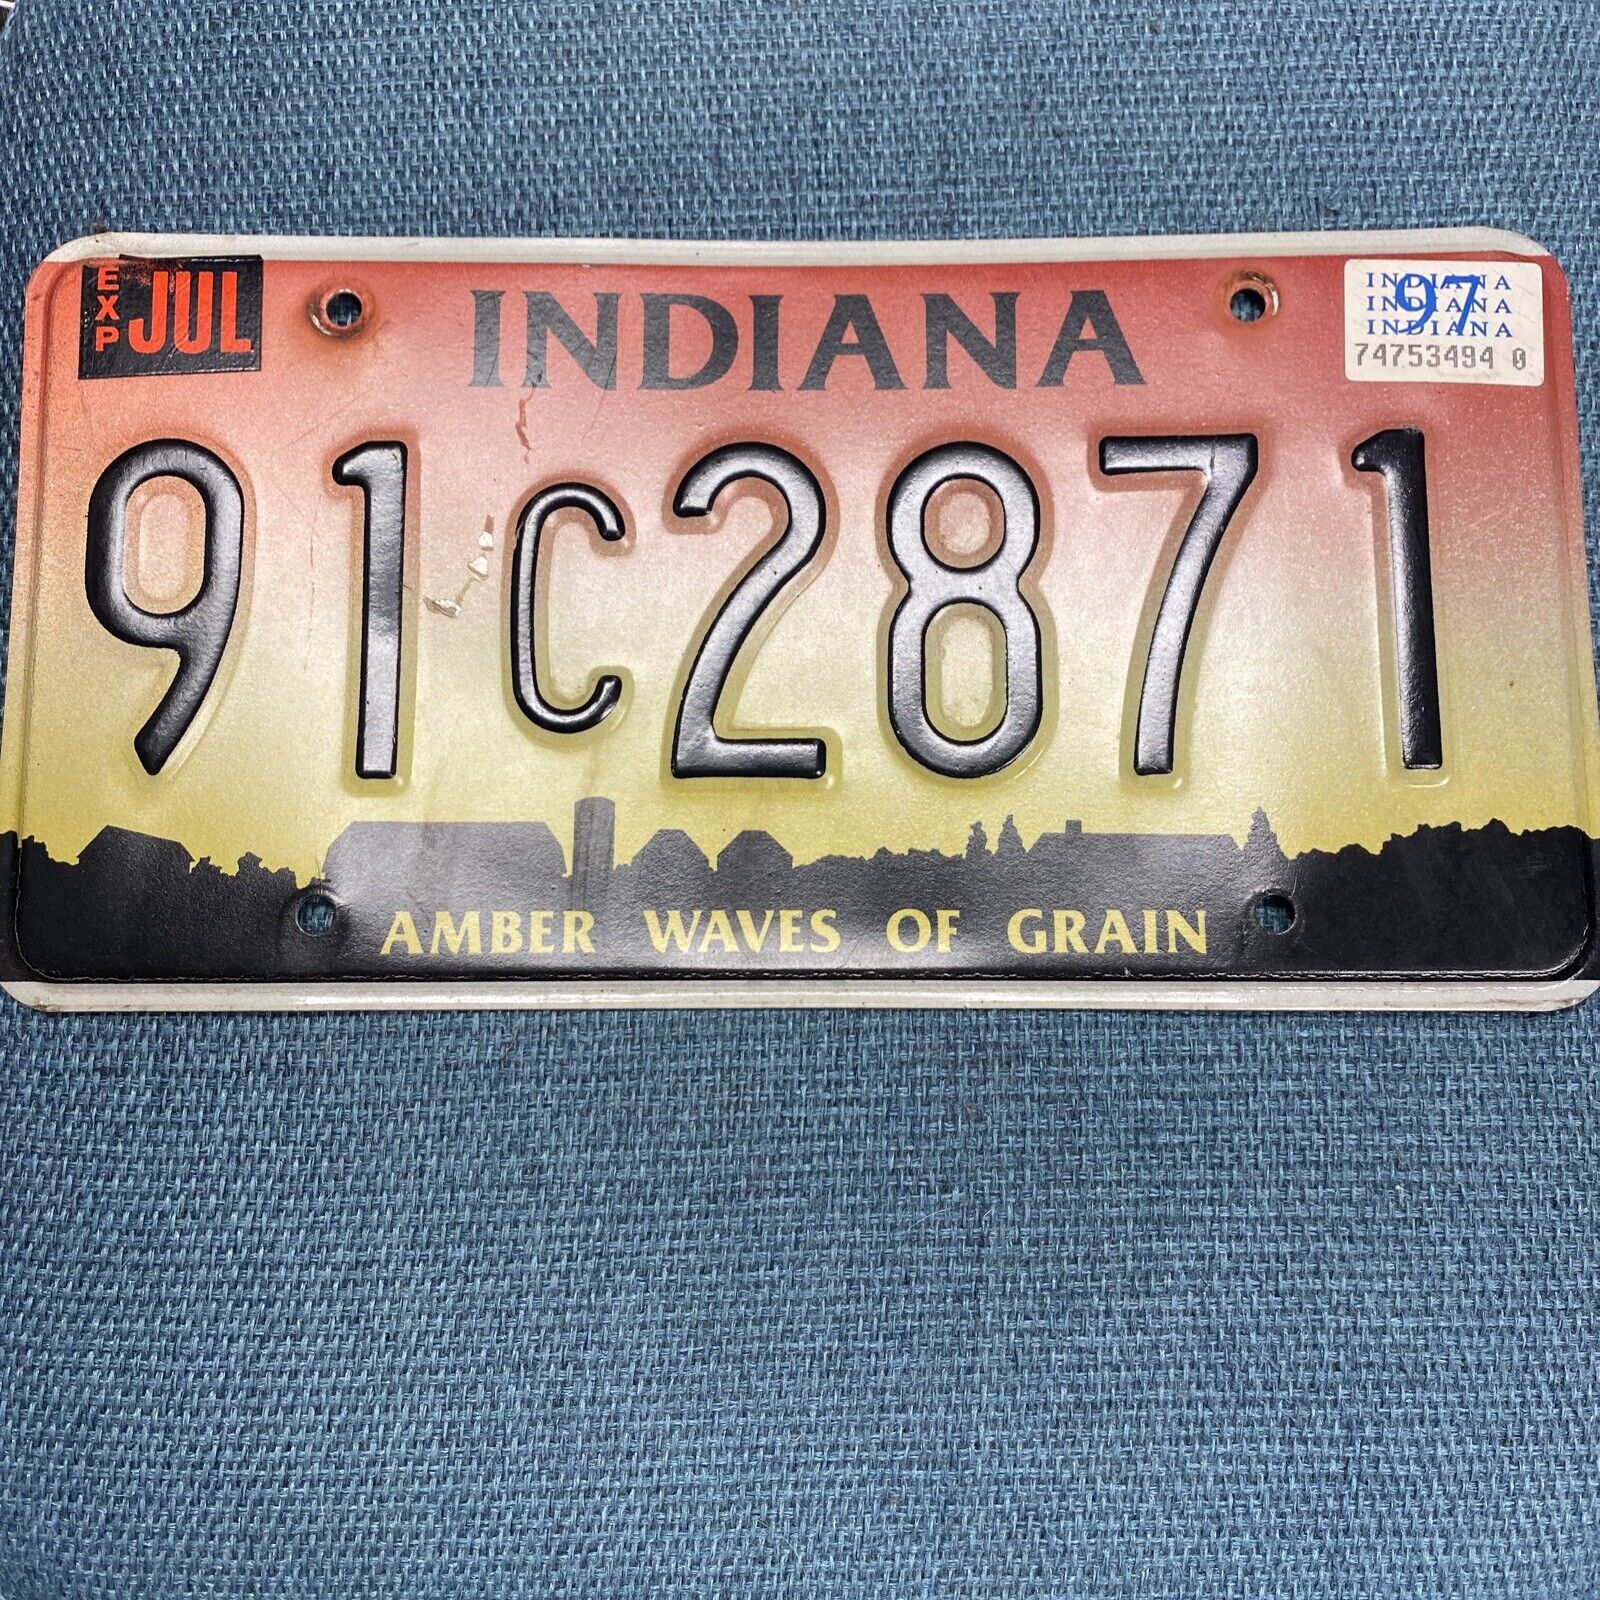 1997 Indiana License Plate - Amber Waves Of Grain Man Cave Garage Office Decor